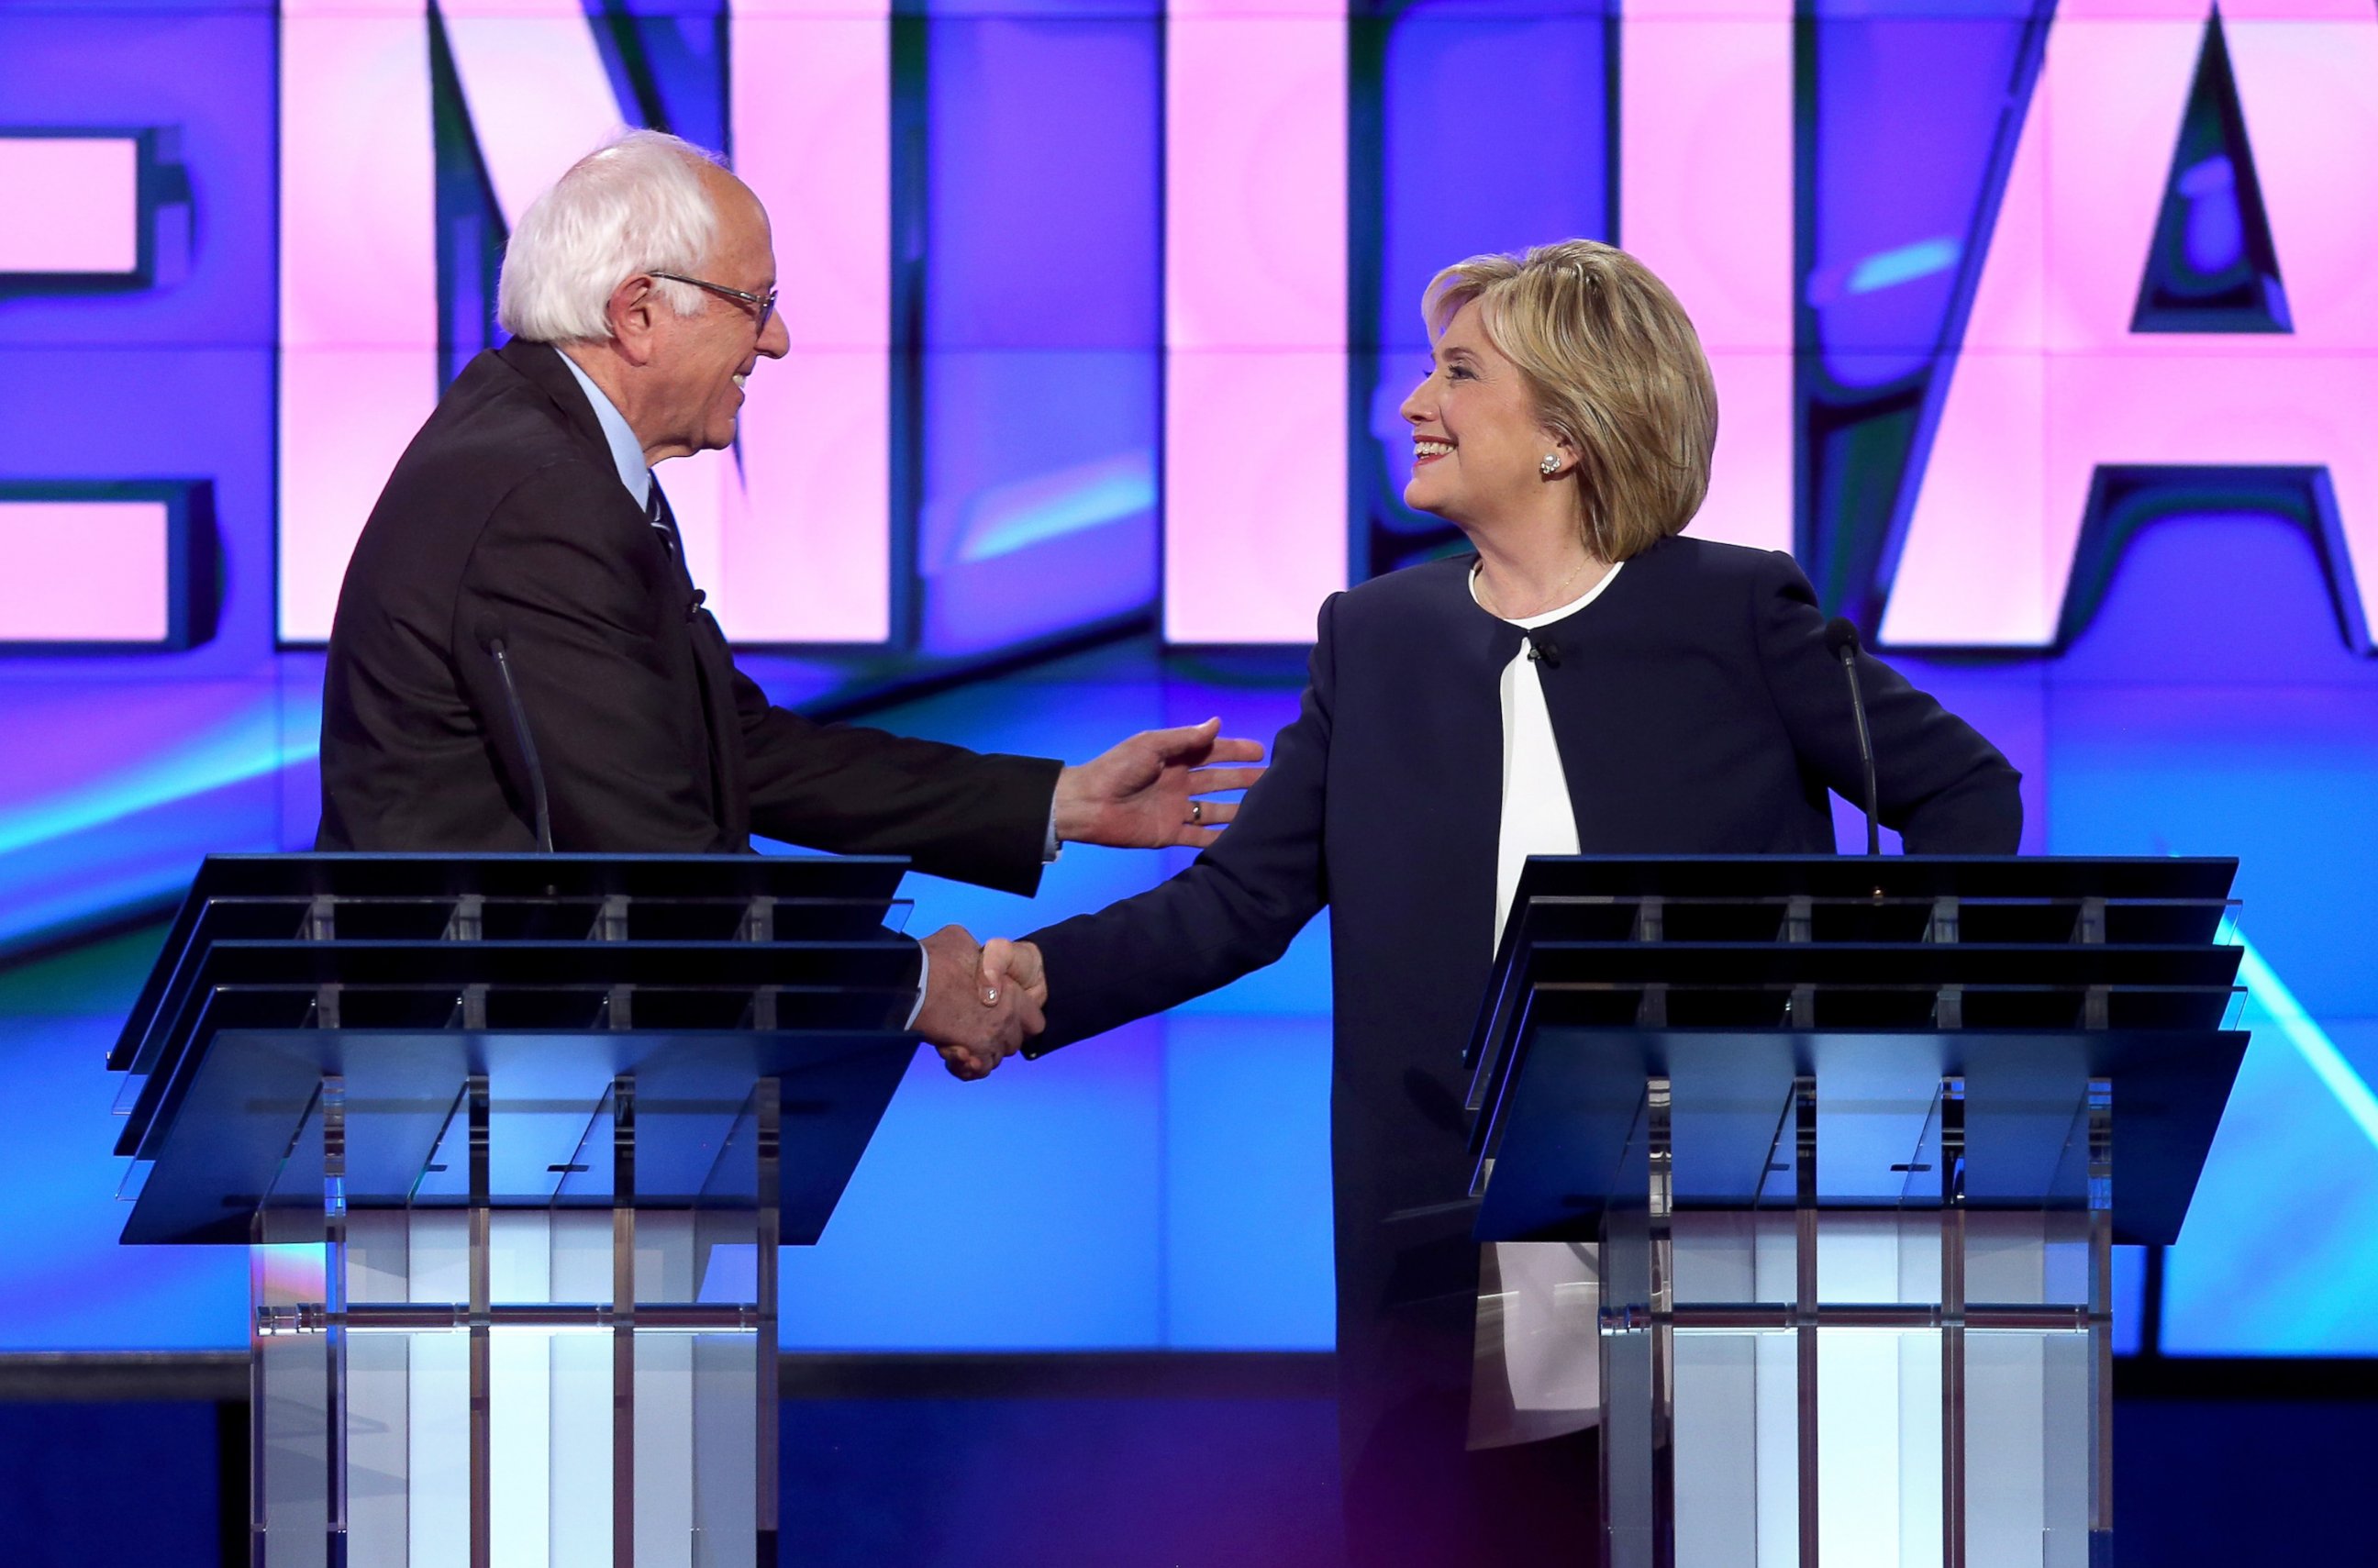 PHOTO: Democratic presidential candidates Sen. Bernie Sanders and Hillary Clinton shake hands at the end of a presidential debate at Wynn Las Vegas, Oct. 13, 2015 in Las Vegas.